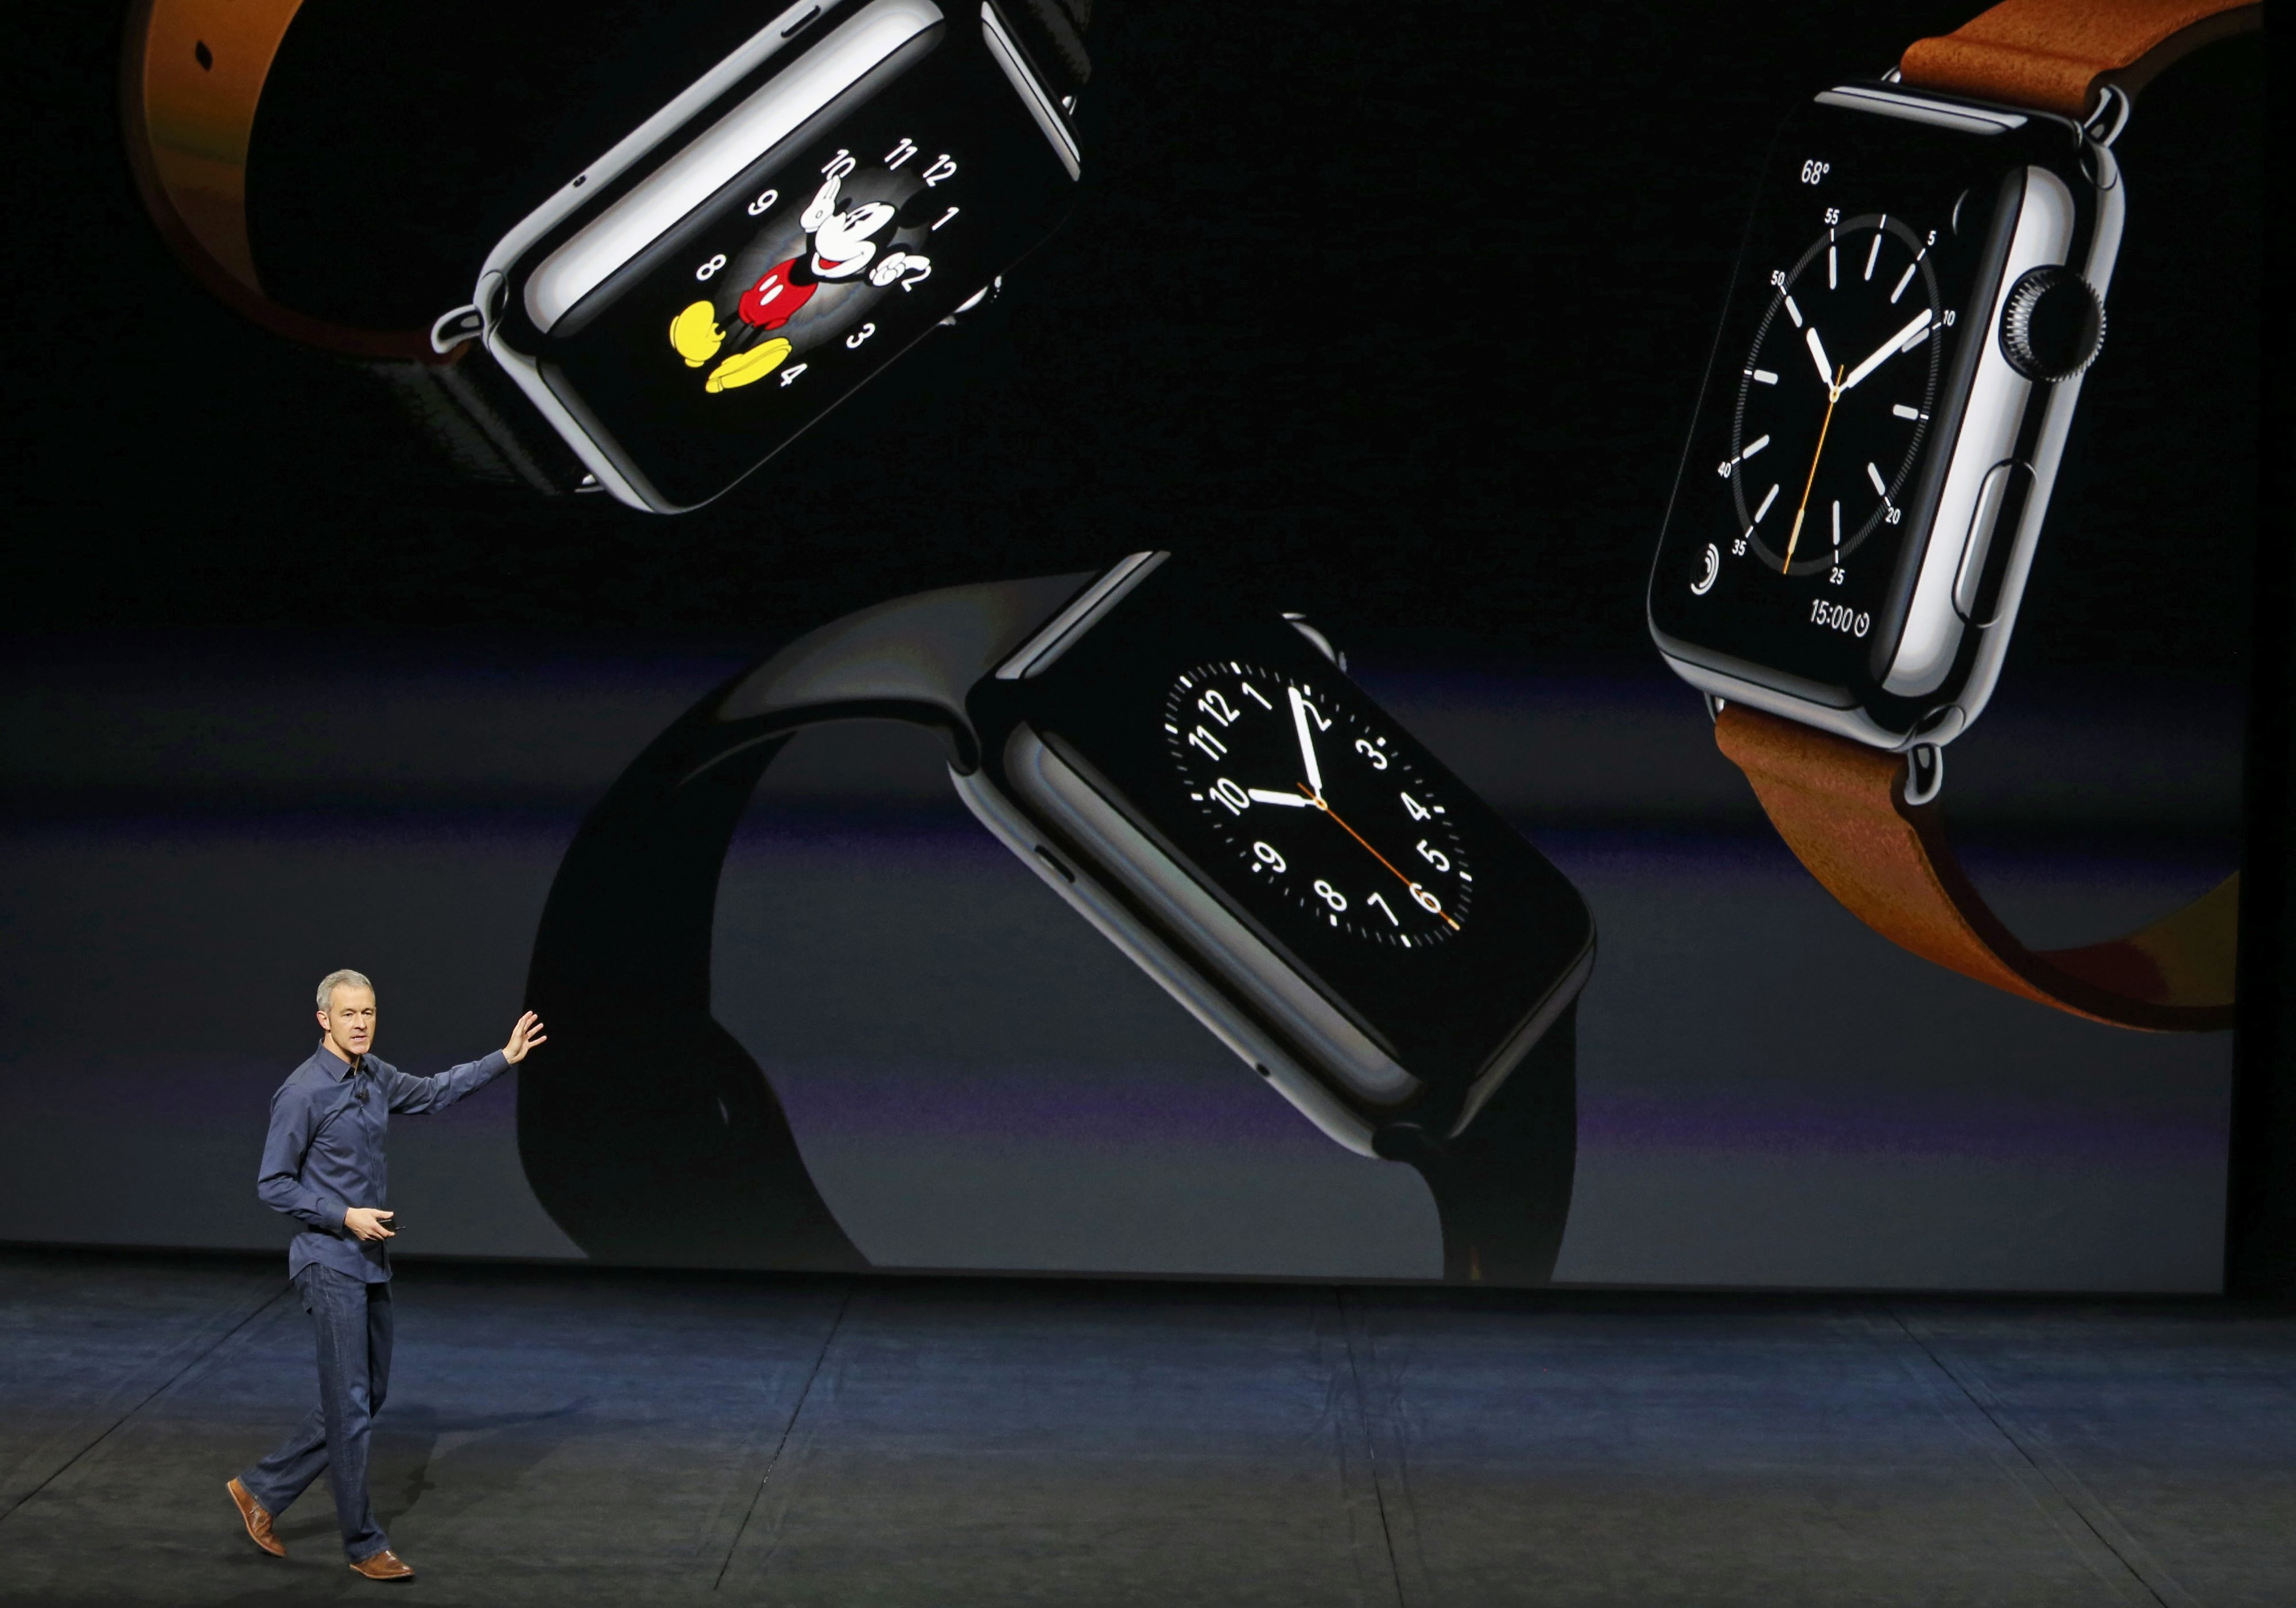 Jeff Williams Apple's senior vice president of Operations, speaks about new finishes for the Apple Watch during an Apple media event in San Francisco, on Sept. 9, 2015. (Beck Diefenbach—Reuters)